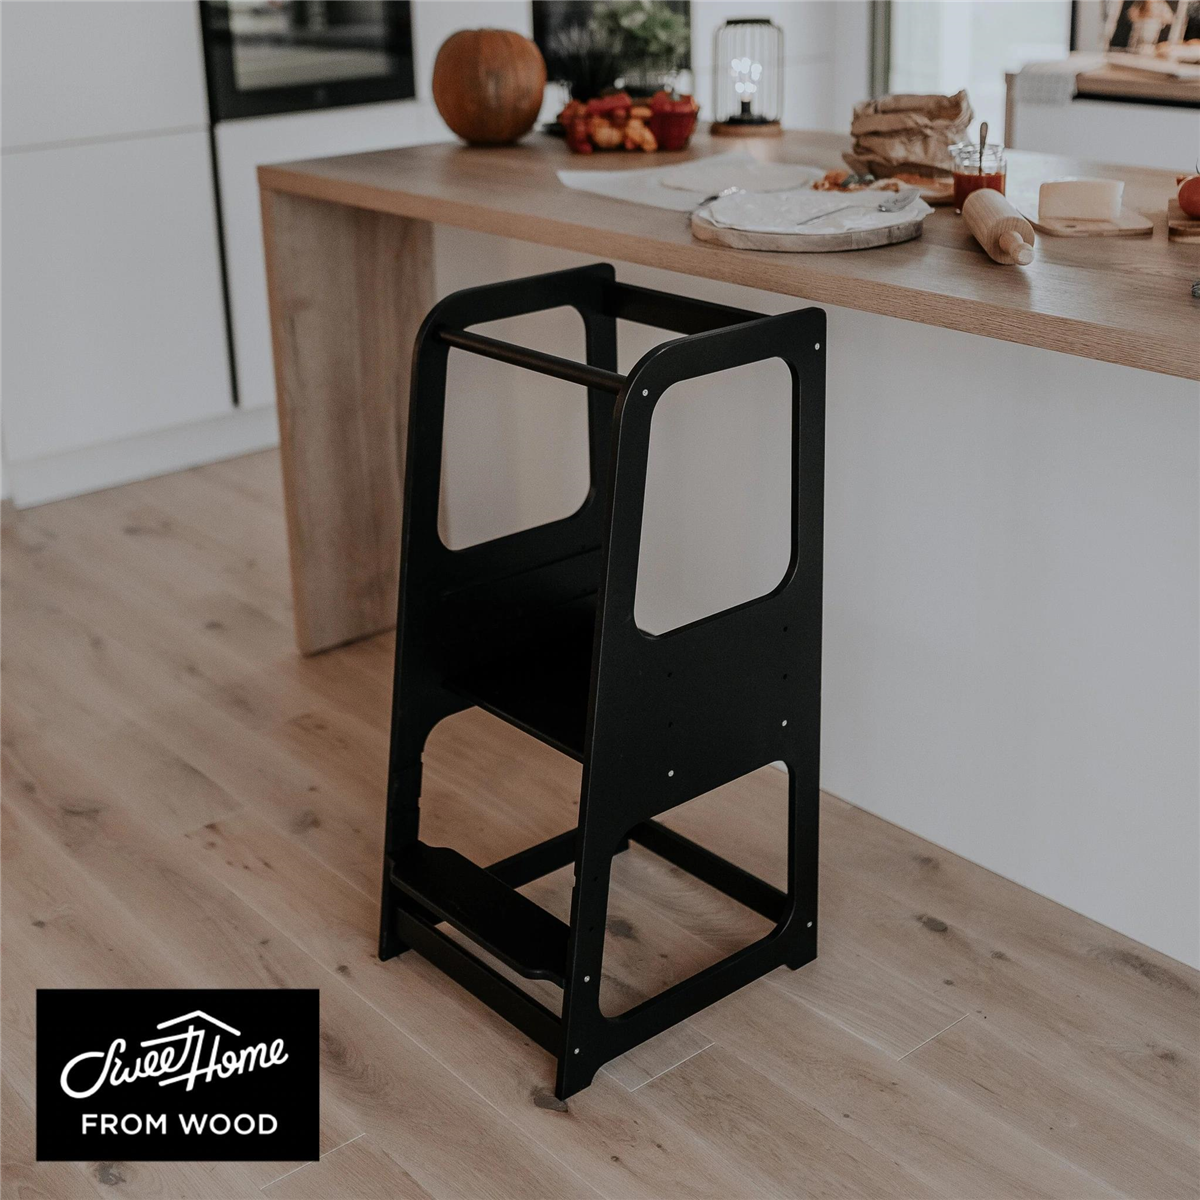 SWEET HOME FROM WOOD - Kitchen Tower -  Black